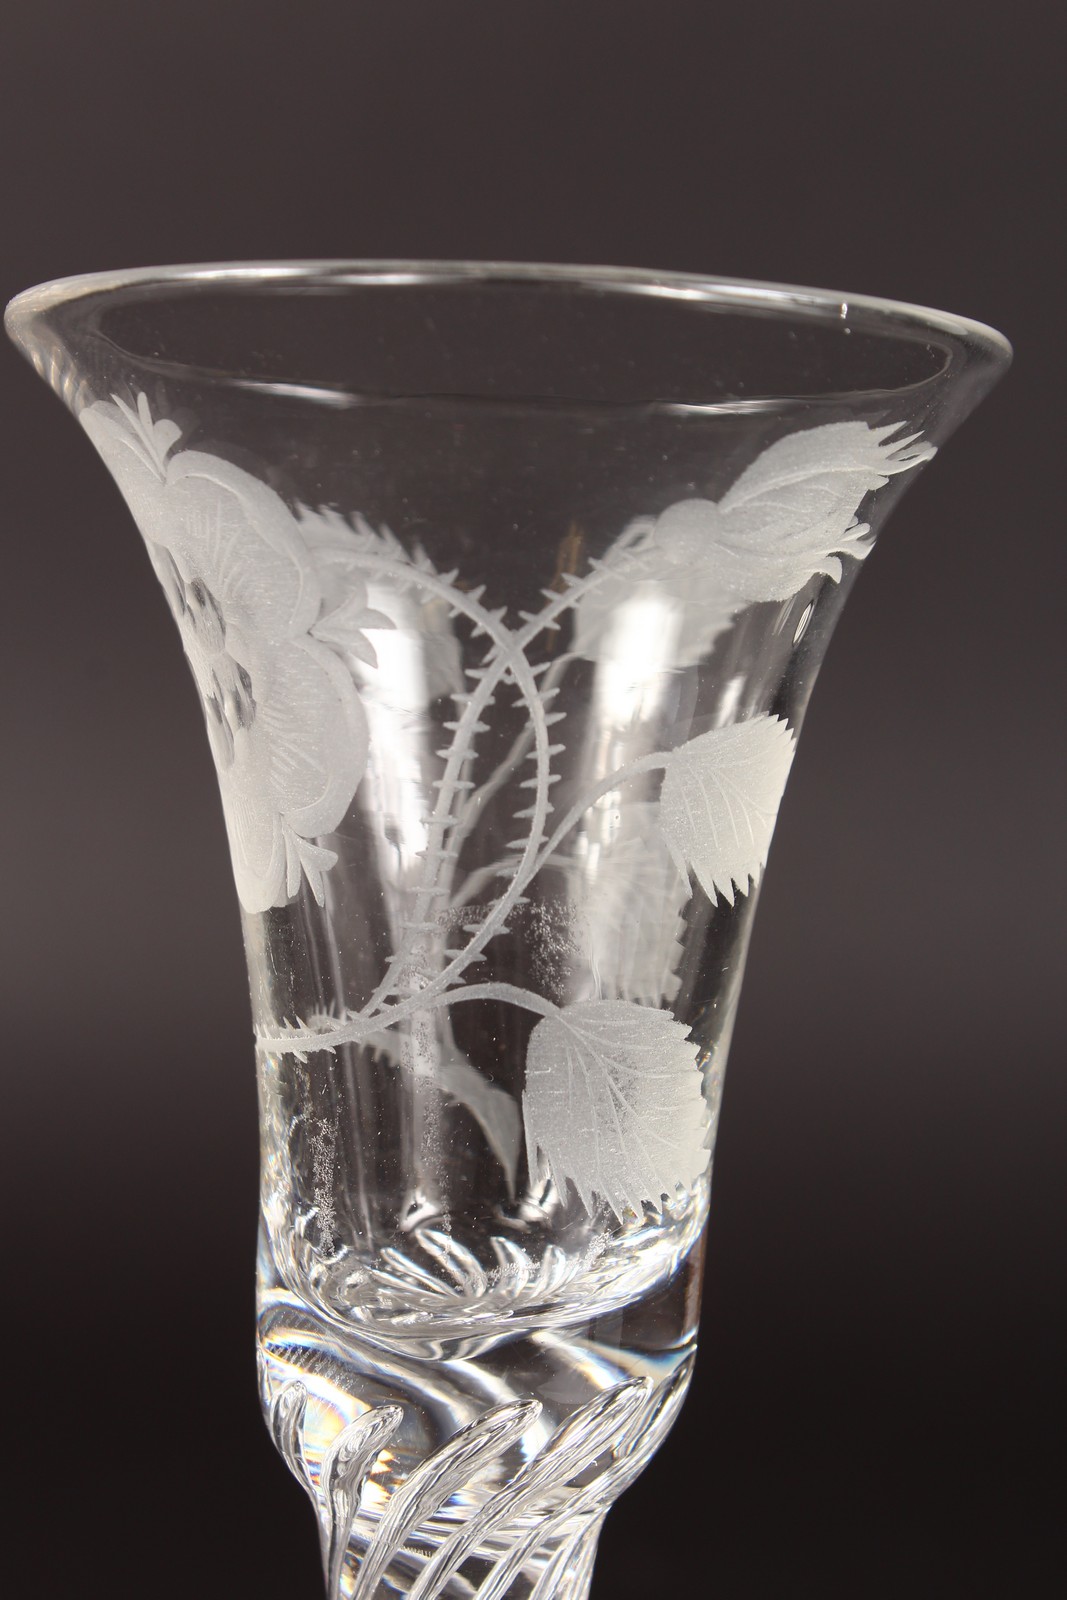 A JACOBITE WINE GLASS, the bowl engraved with six petal rose, with air twist stem. 6ins high. - Image 5 of 5